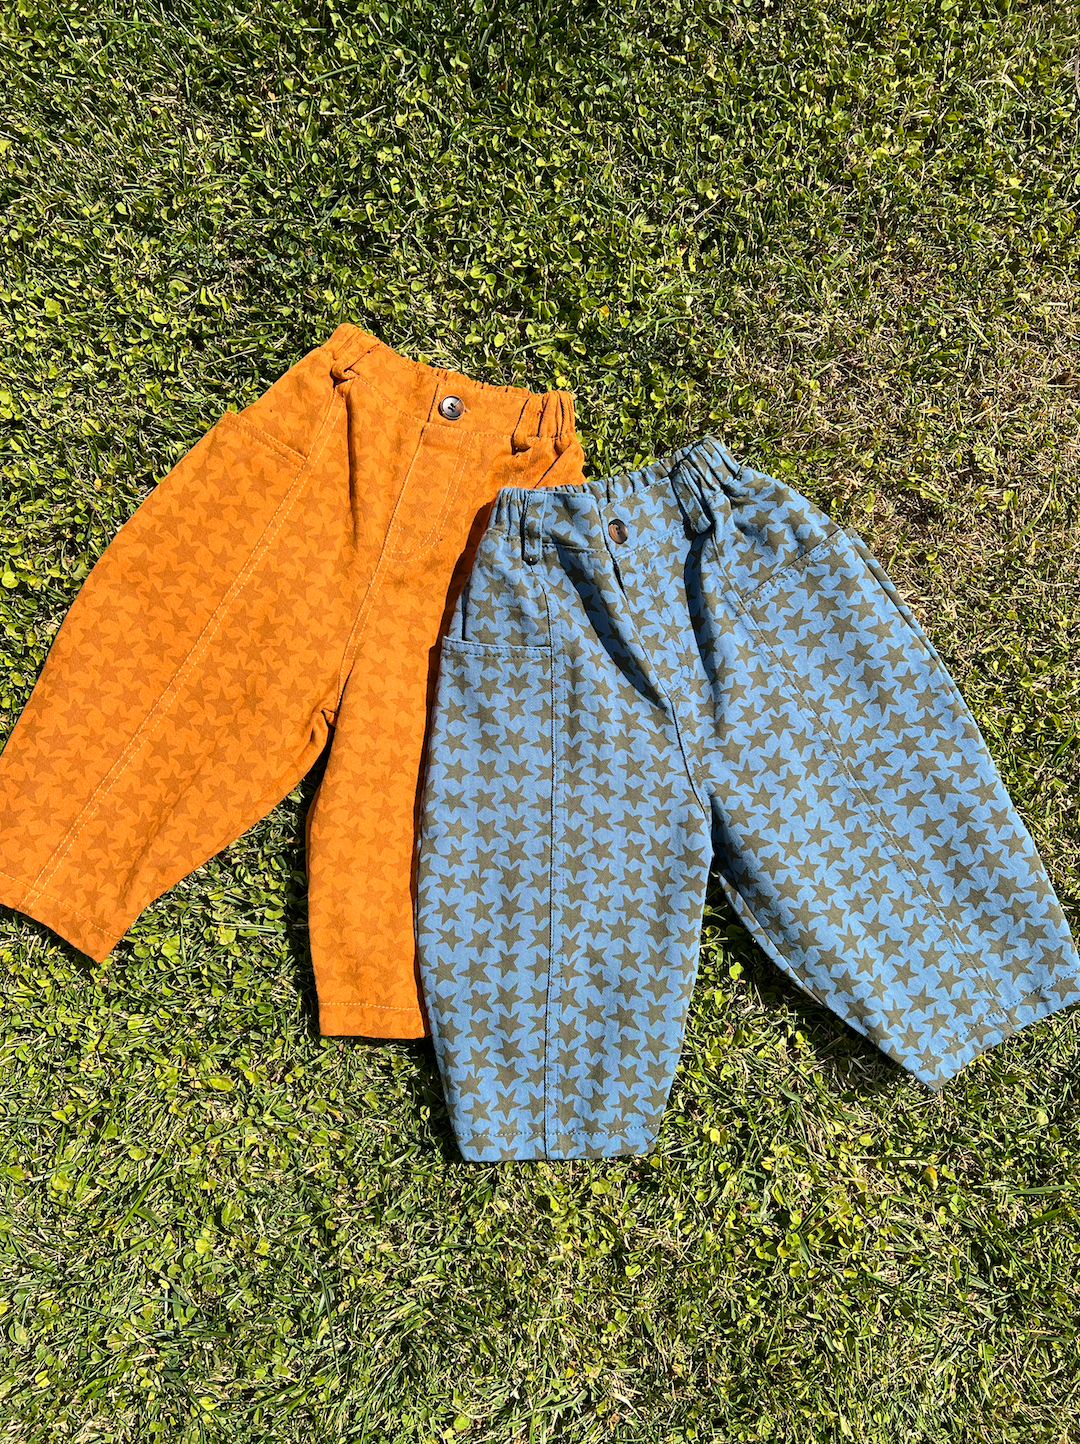 Two pairs of kids' pants laid on grass: one in orange with a rust star pattern, one in slate blue with olive green stars